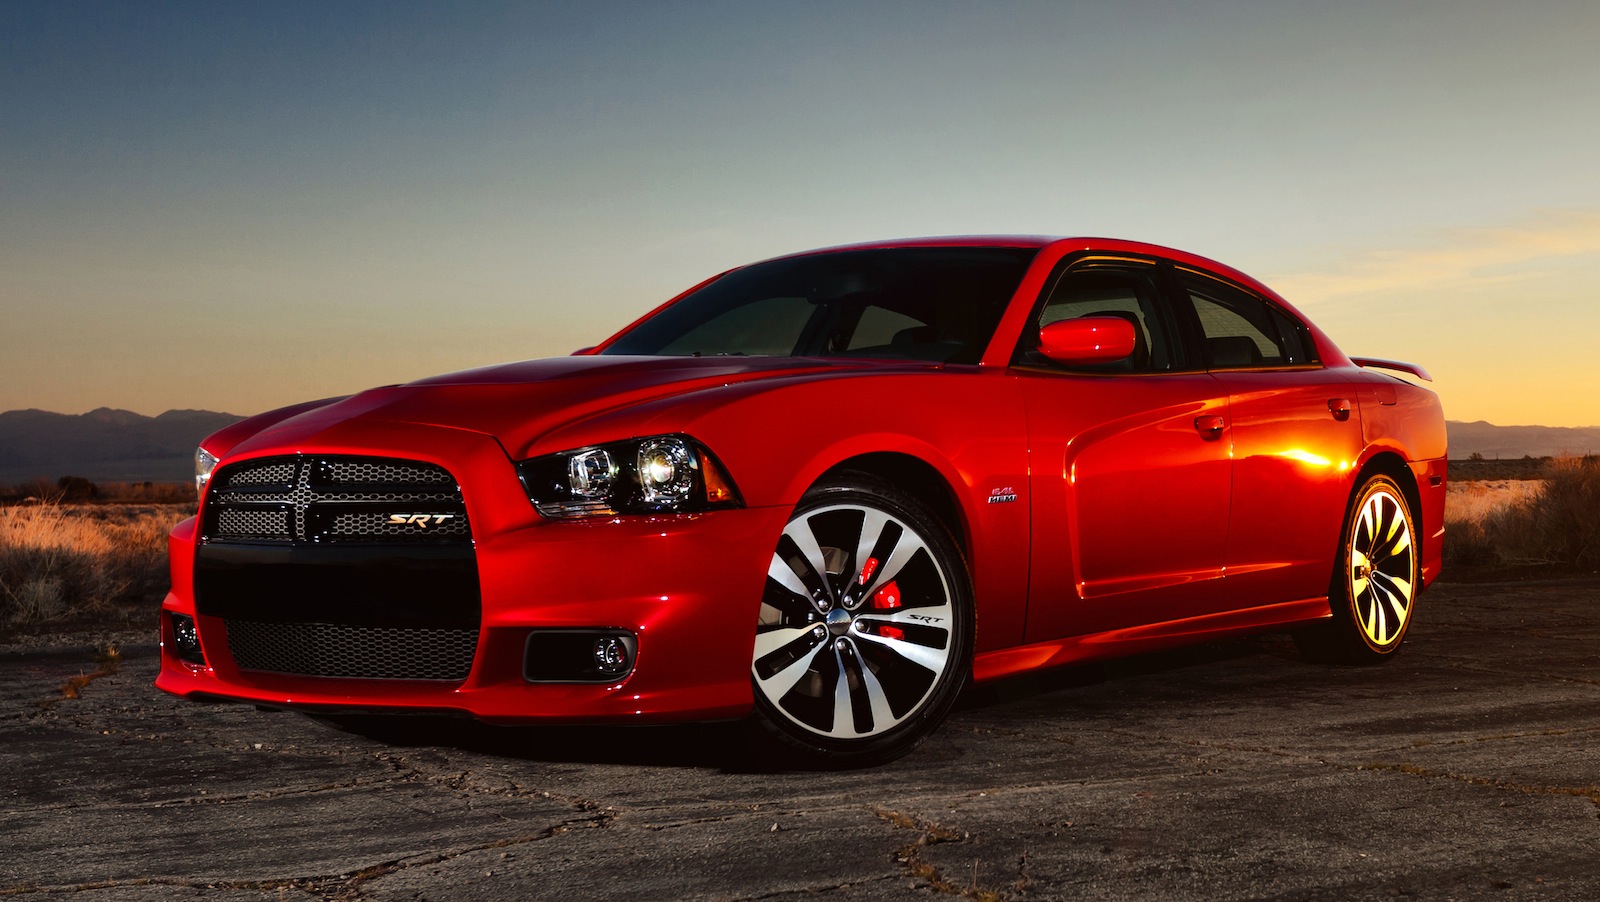 Dodge Charger Id Buzzerg